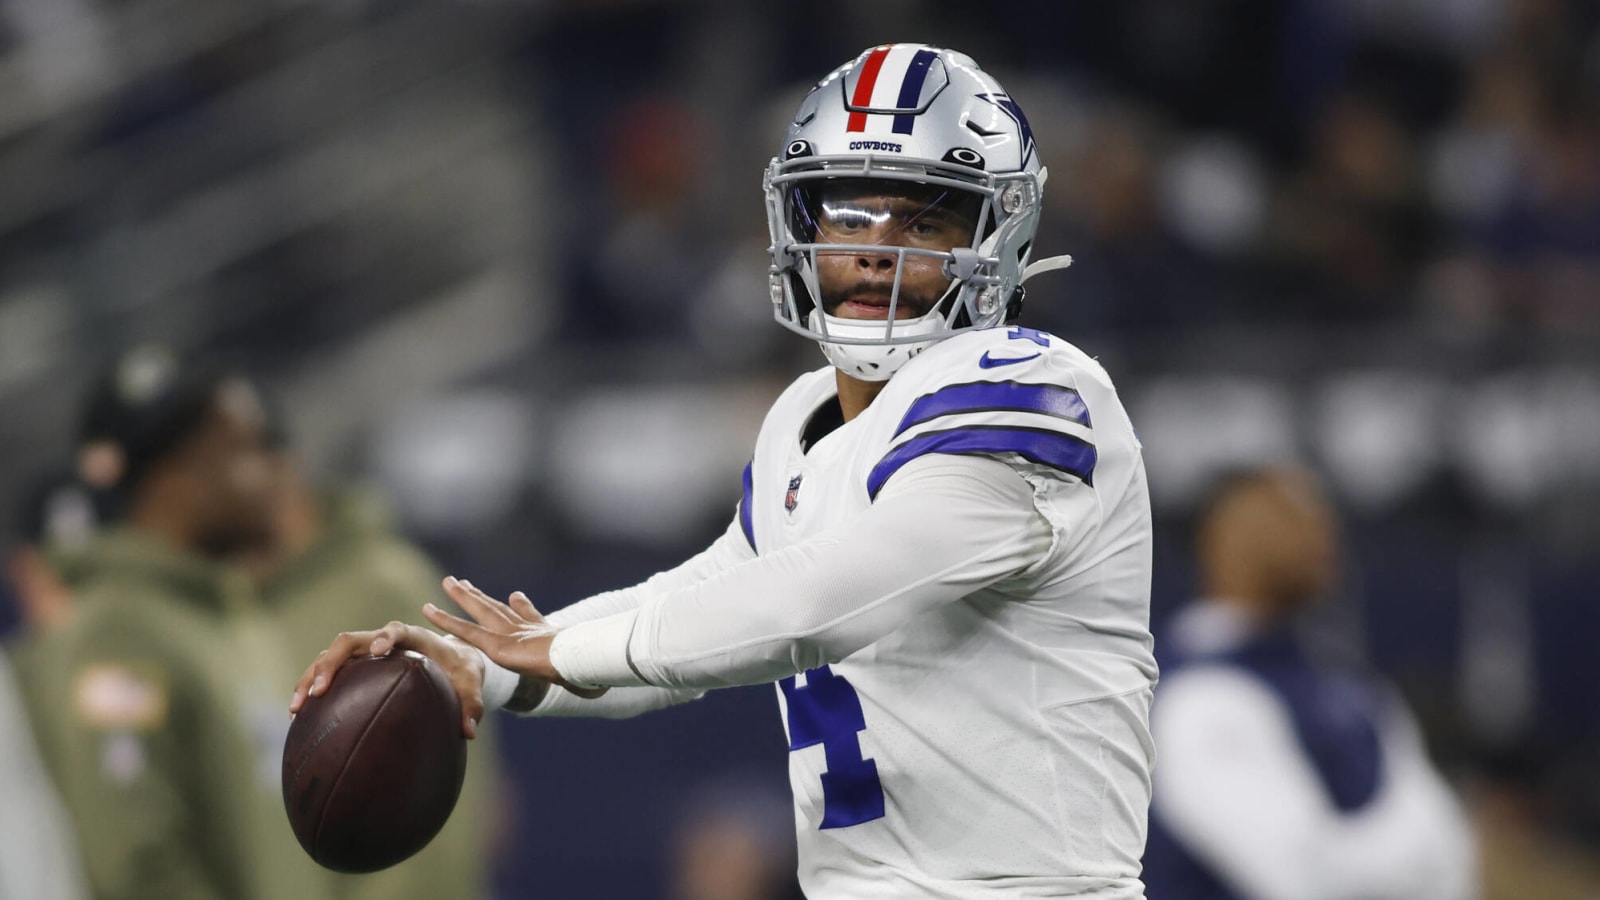 Why the Cowboys are rocking red stripes on their helmets